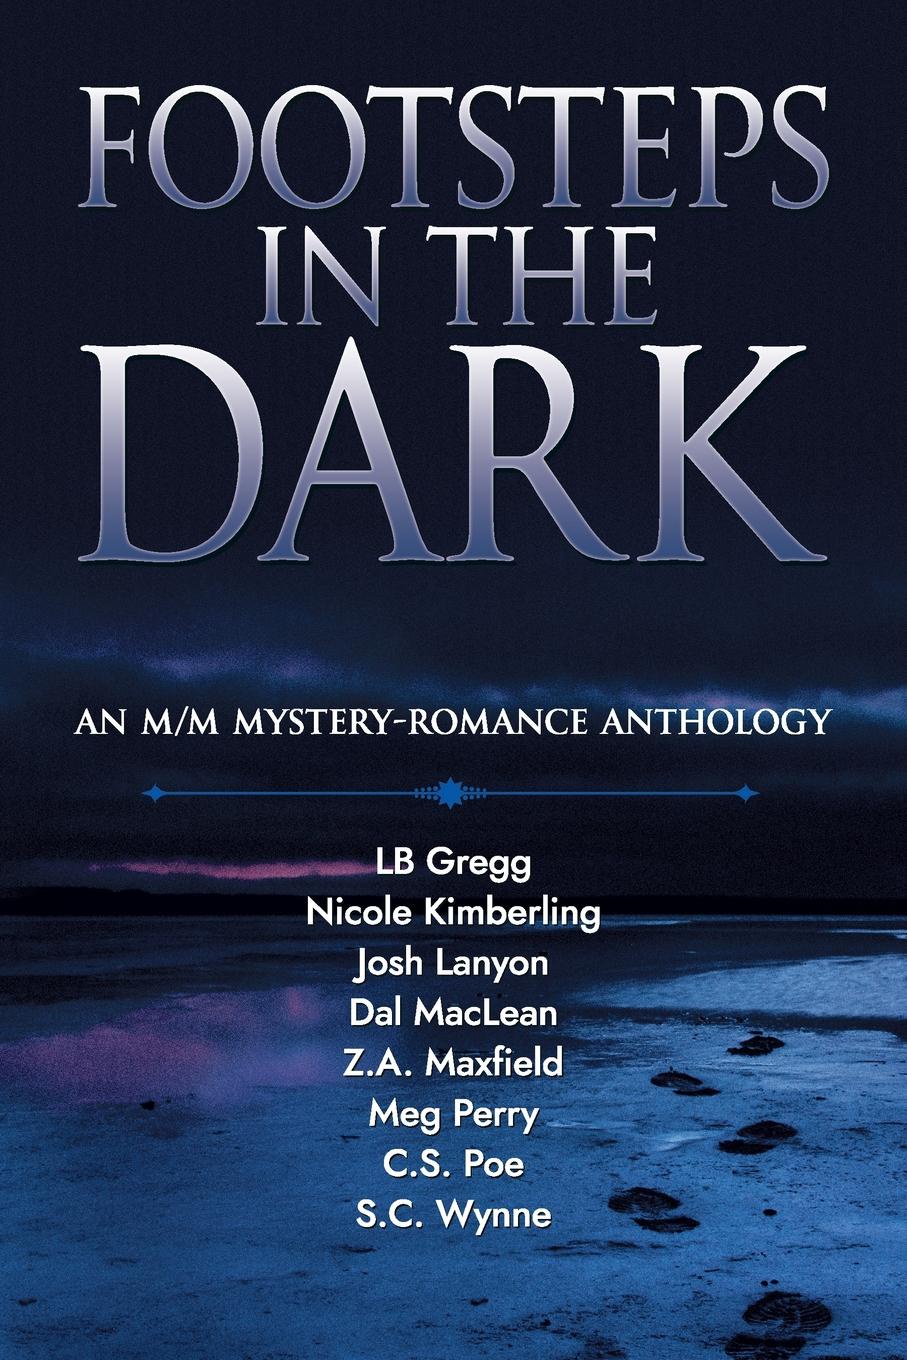 Footsteps in the Dark. An M/M Mystery Romance Anthology